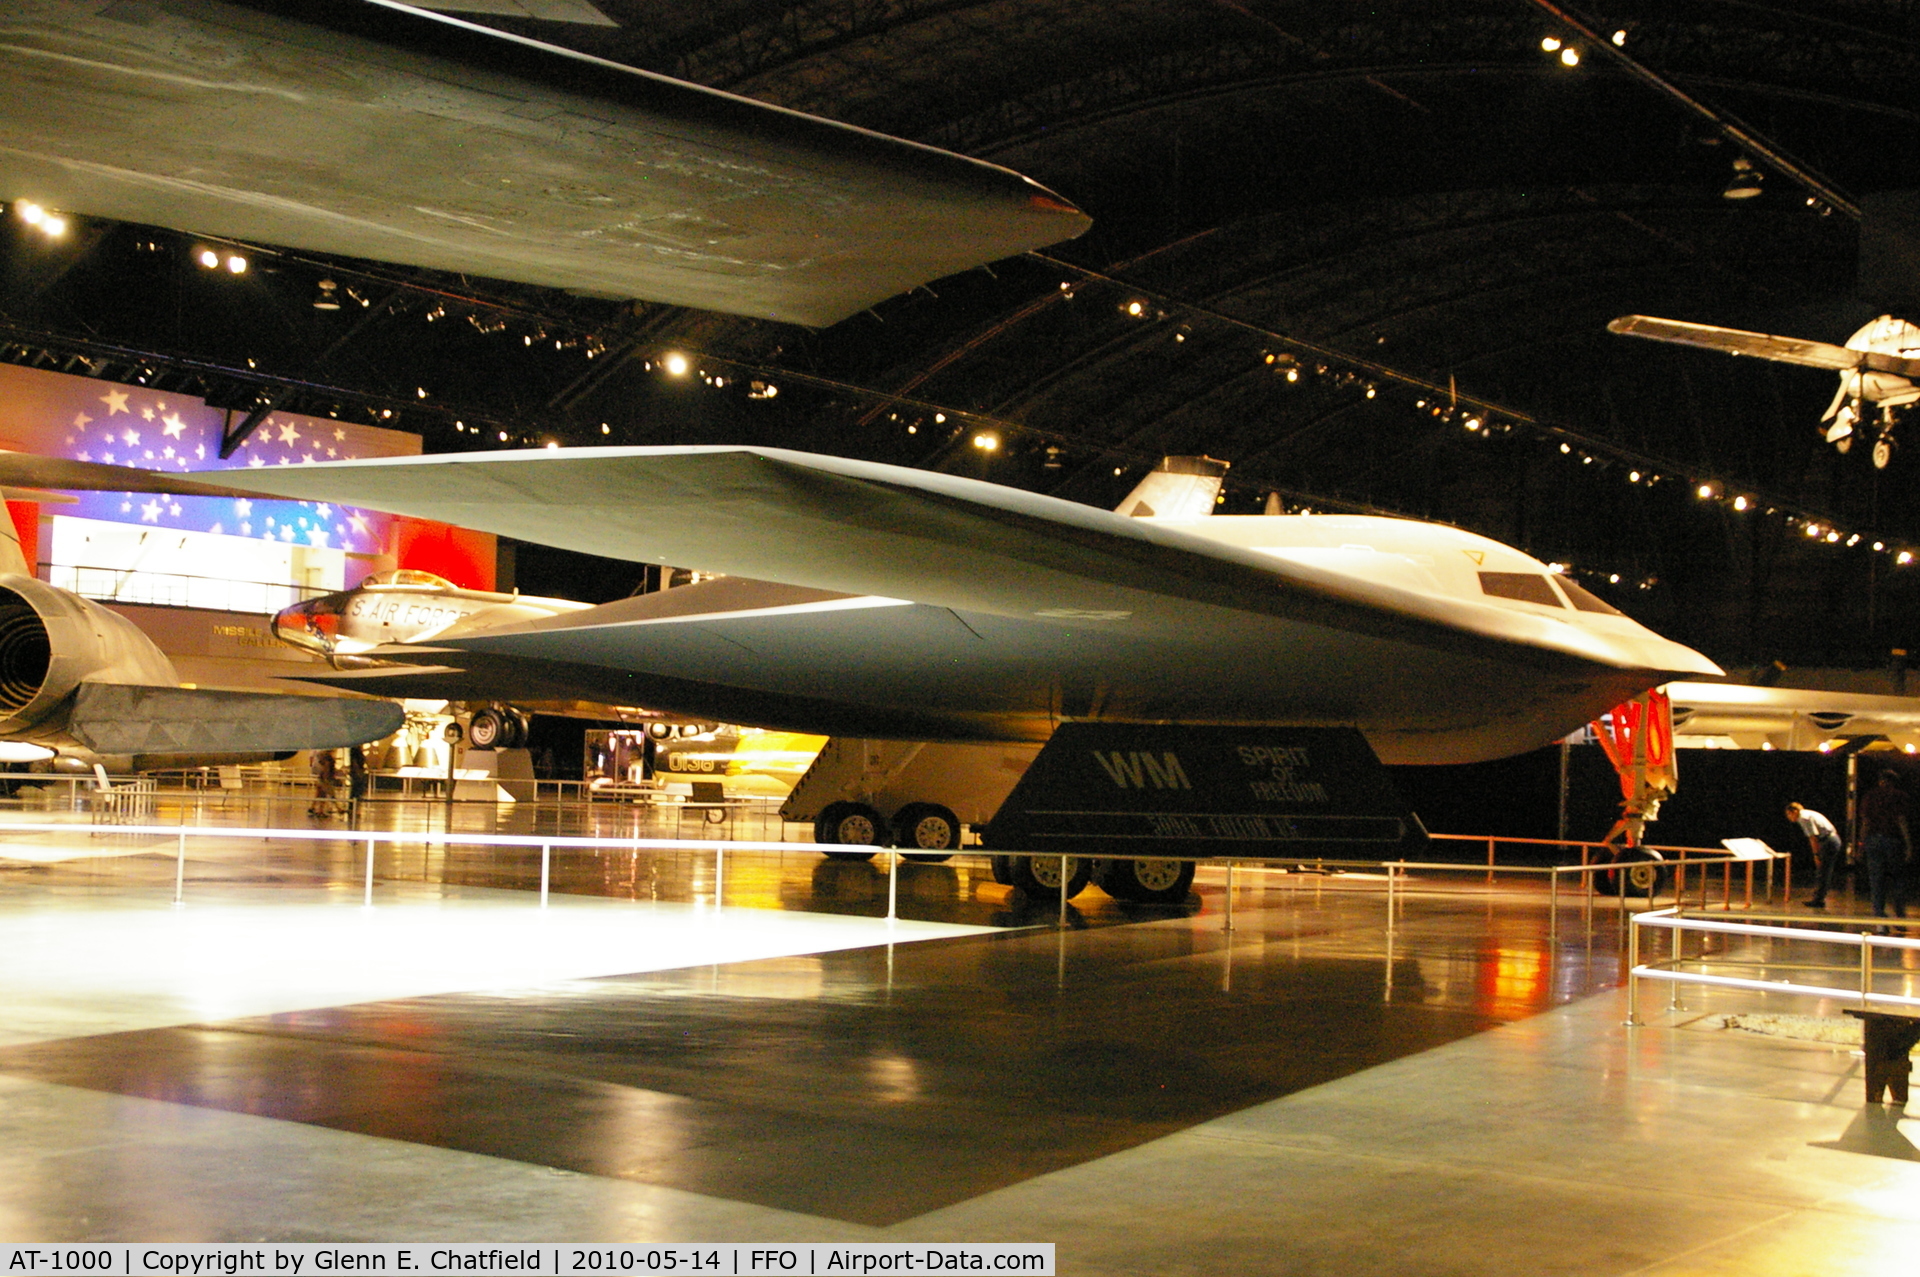 AT-1000, 1982 Northrop Grumman B-2A Spirit C/N Not found AT-1000, At the National Museum of the USAF